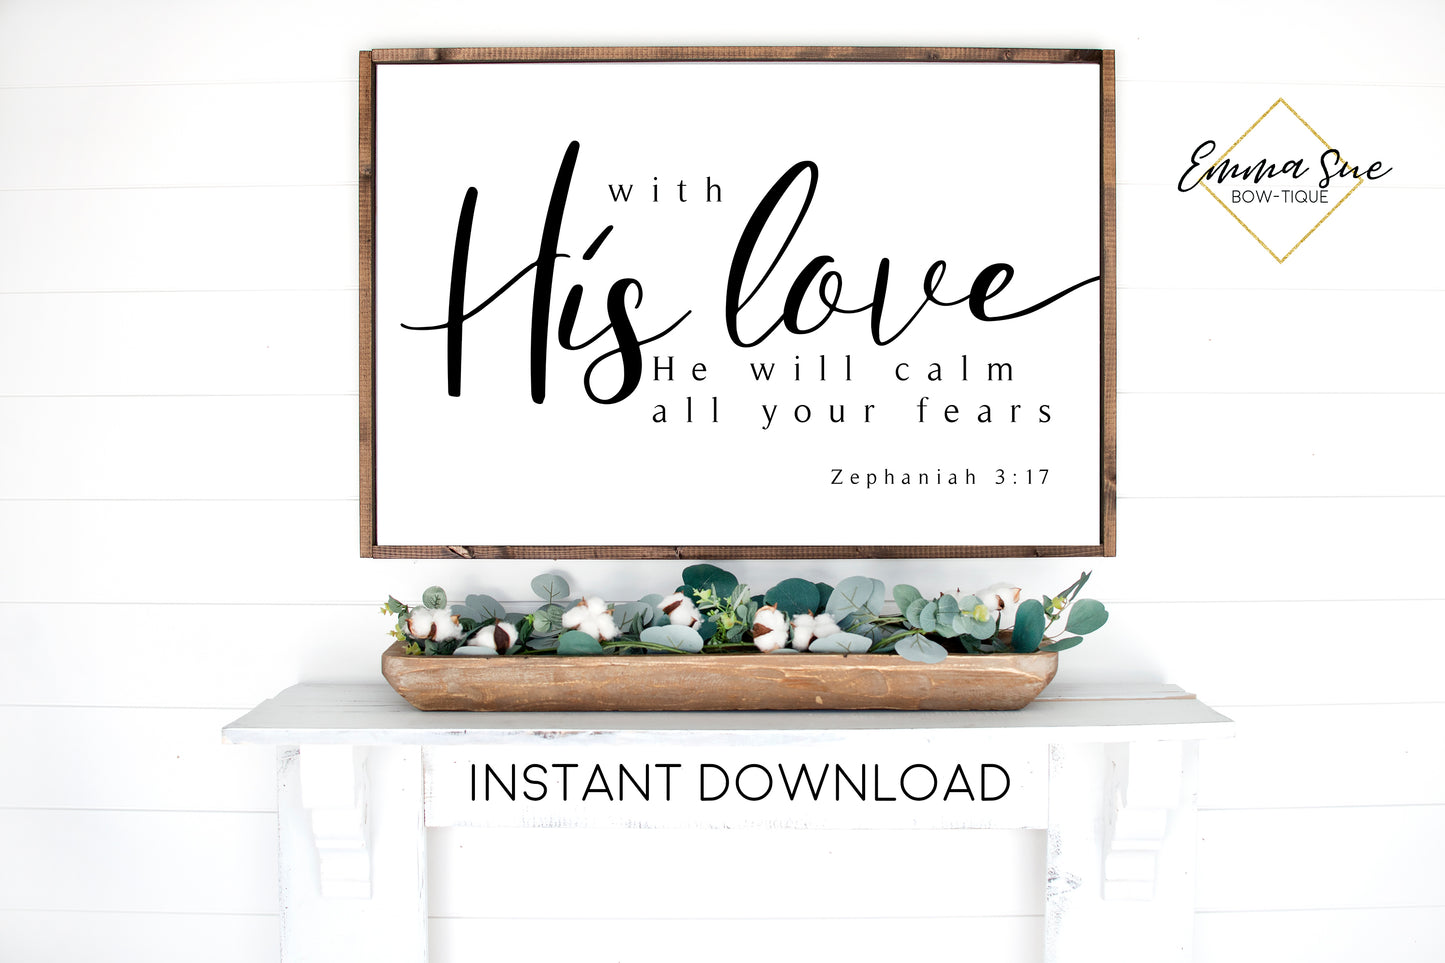 With His love He will calm all your fears - Zephaniah 3:17 Bible Verse Printable Sign Wall Art - Instant Download